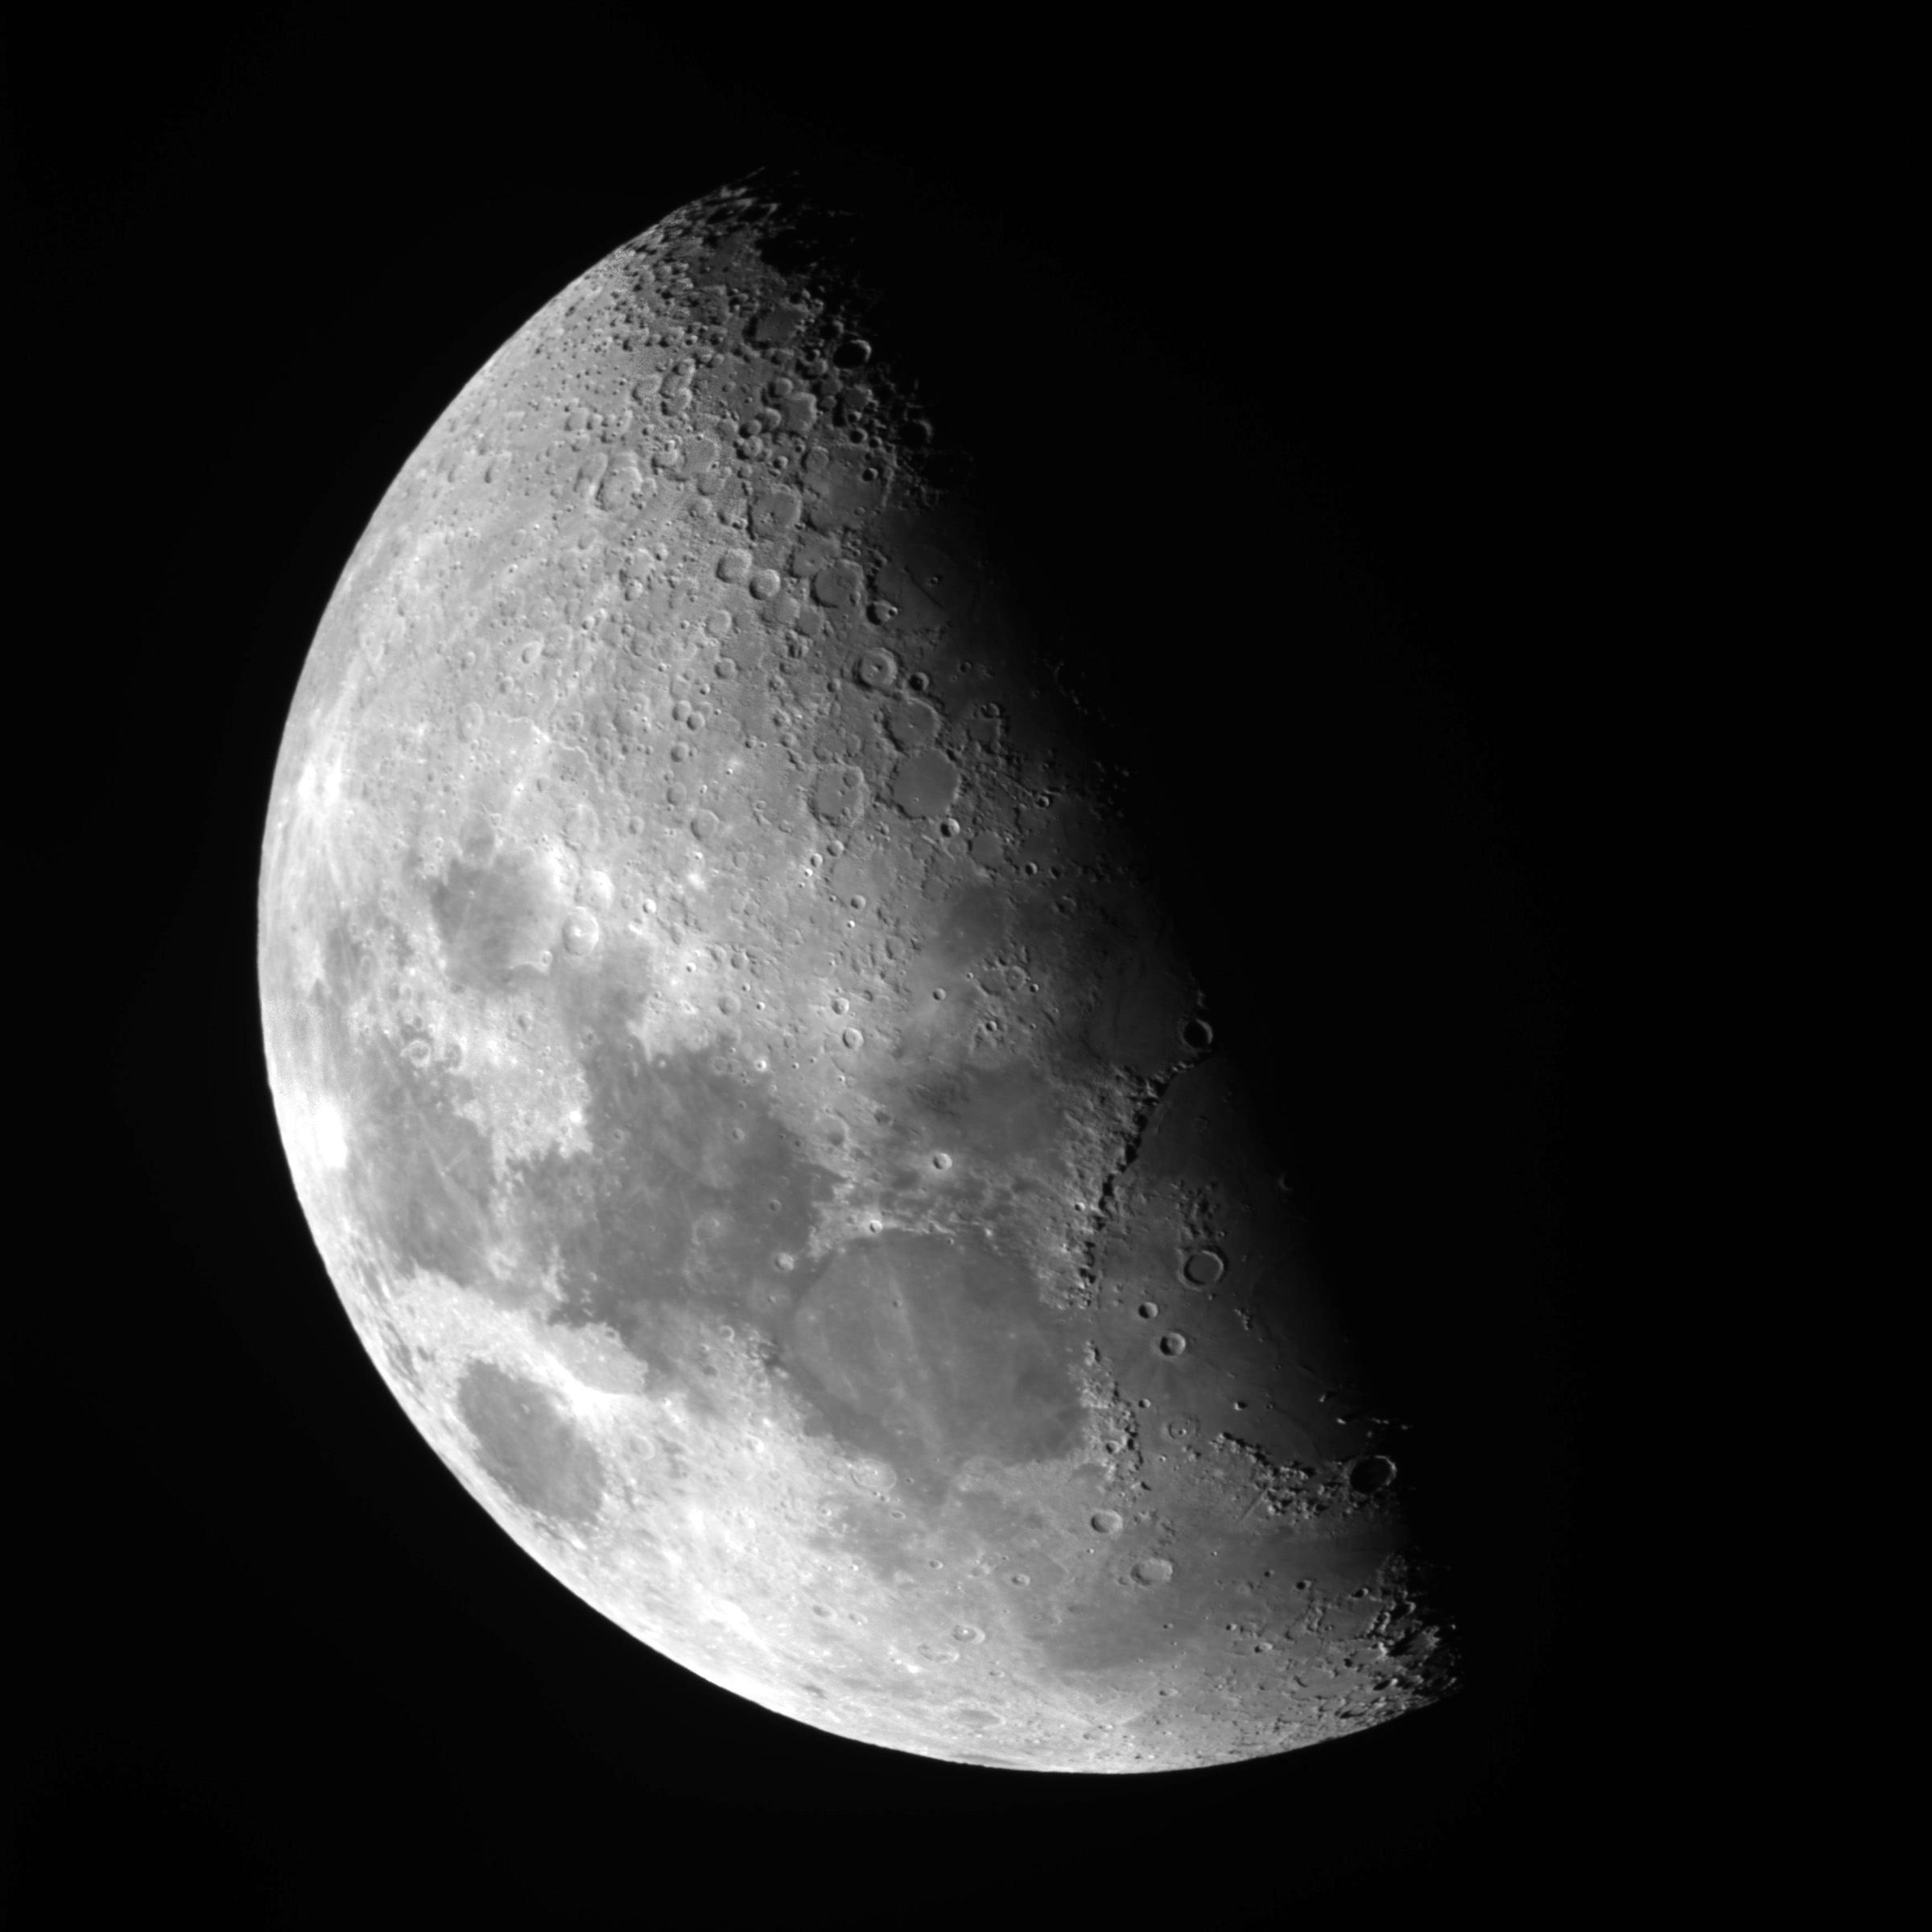 Top 91+ Images pictures of a half moon Full HD, 2k, 4k